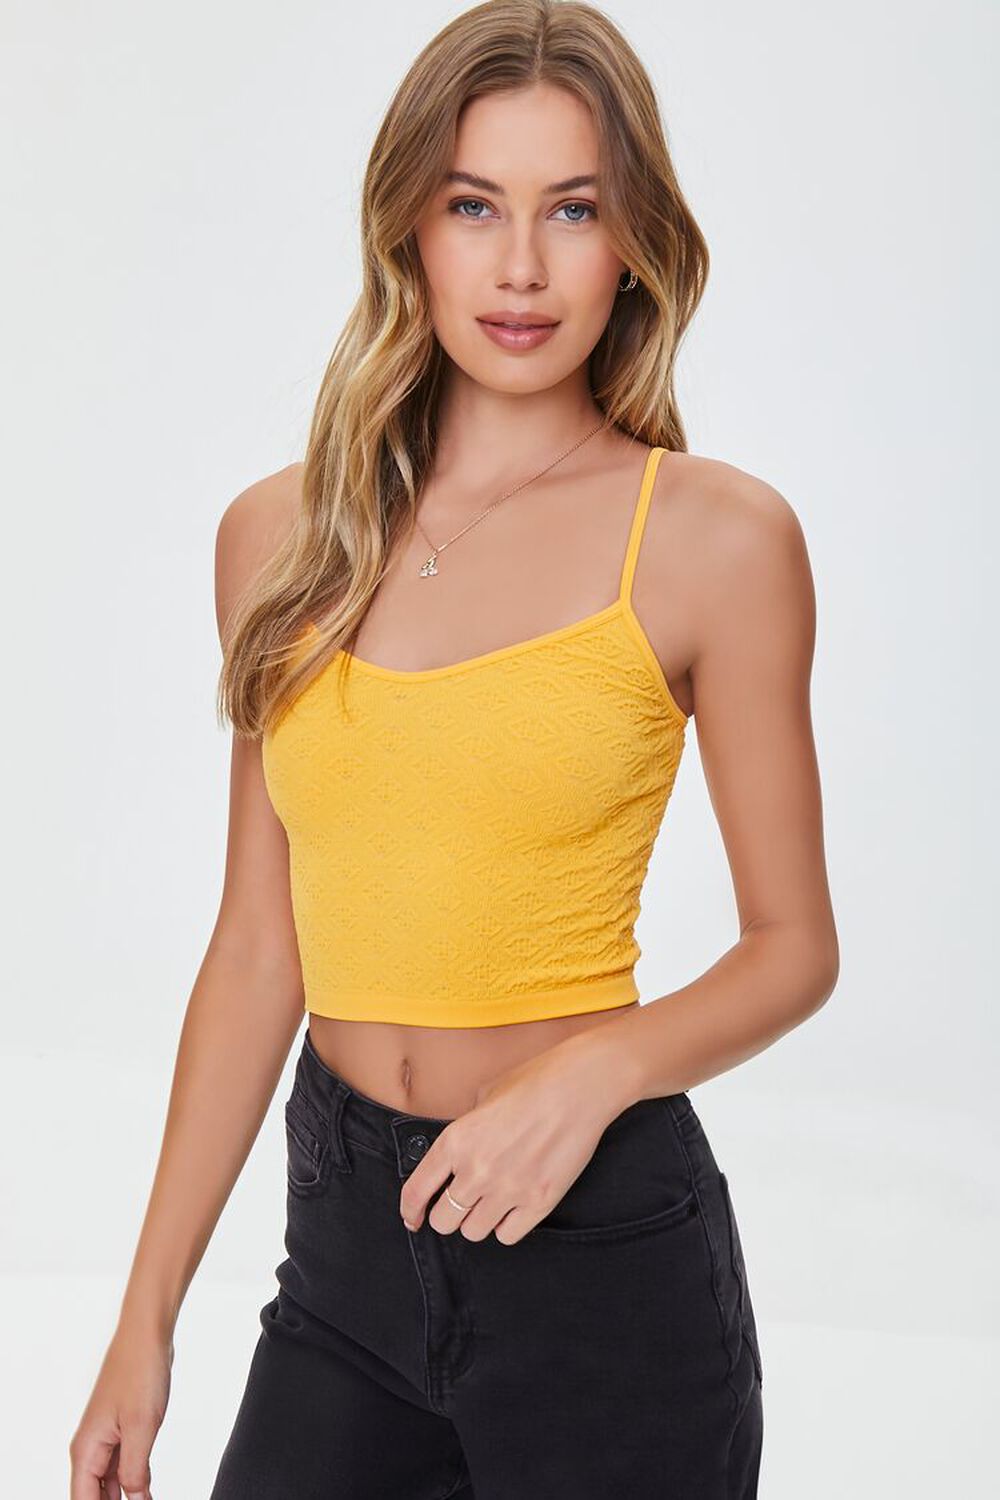 MARIGOLD Textured Cropped Cami, image 1